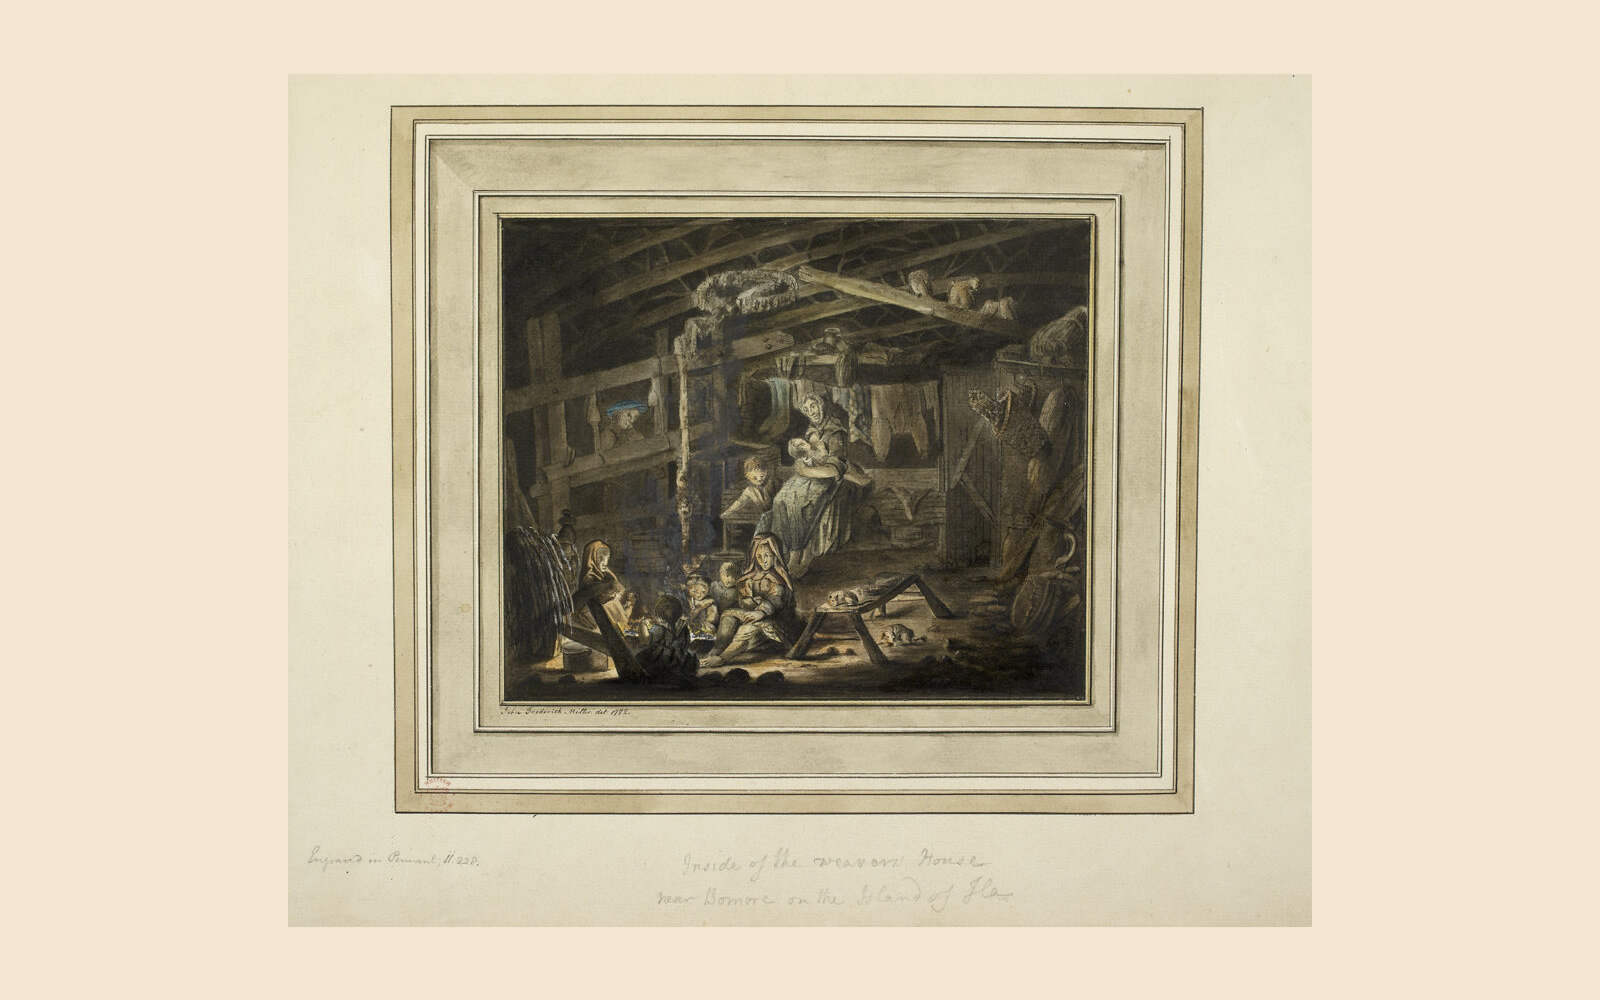 John Frederick Miller, 'Inside of the Weavers House near Bomore on the Island of Ila' (British Library)